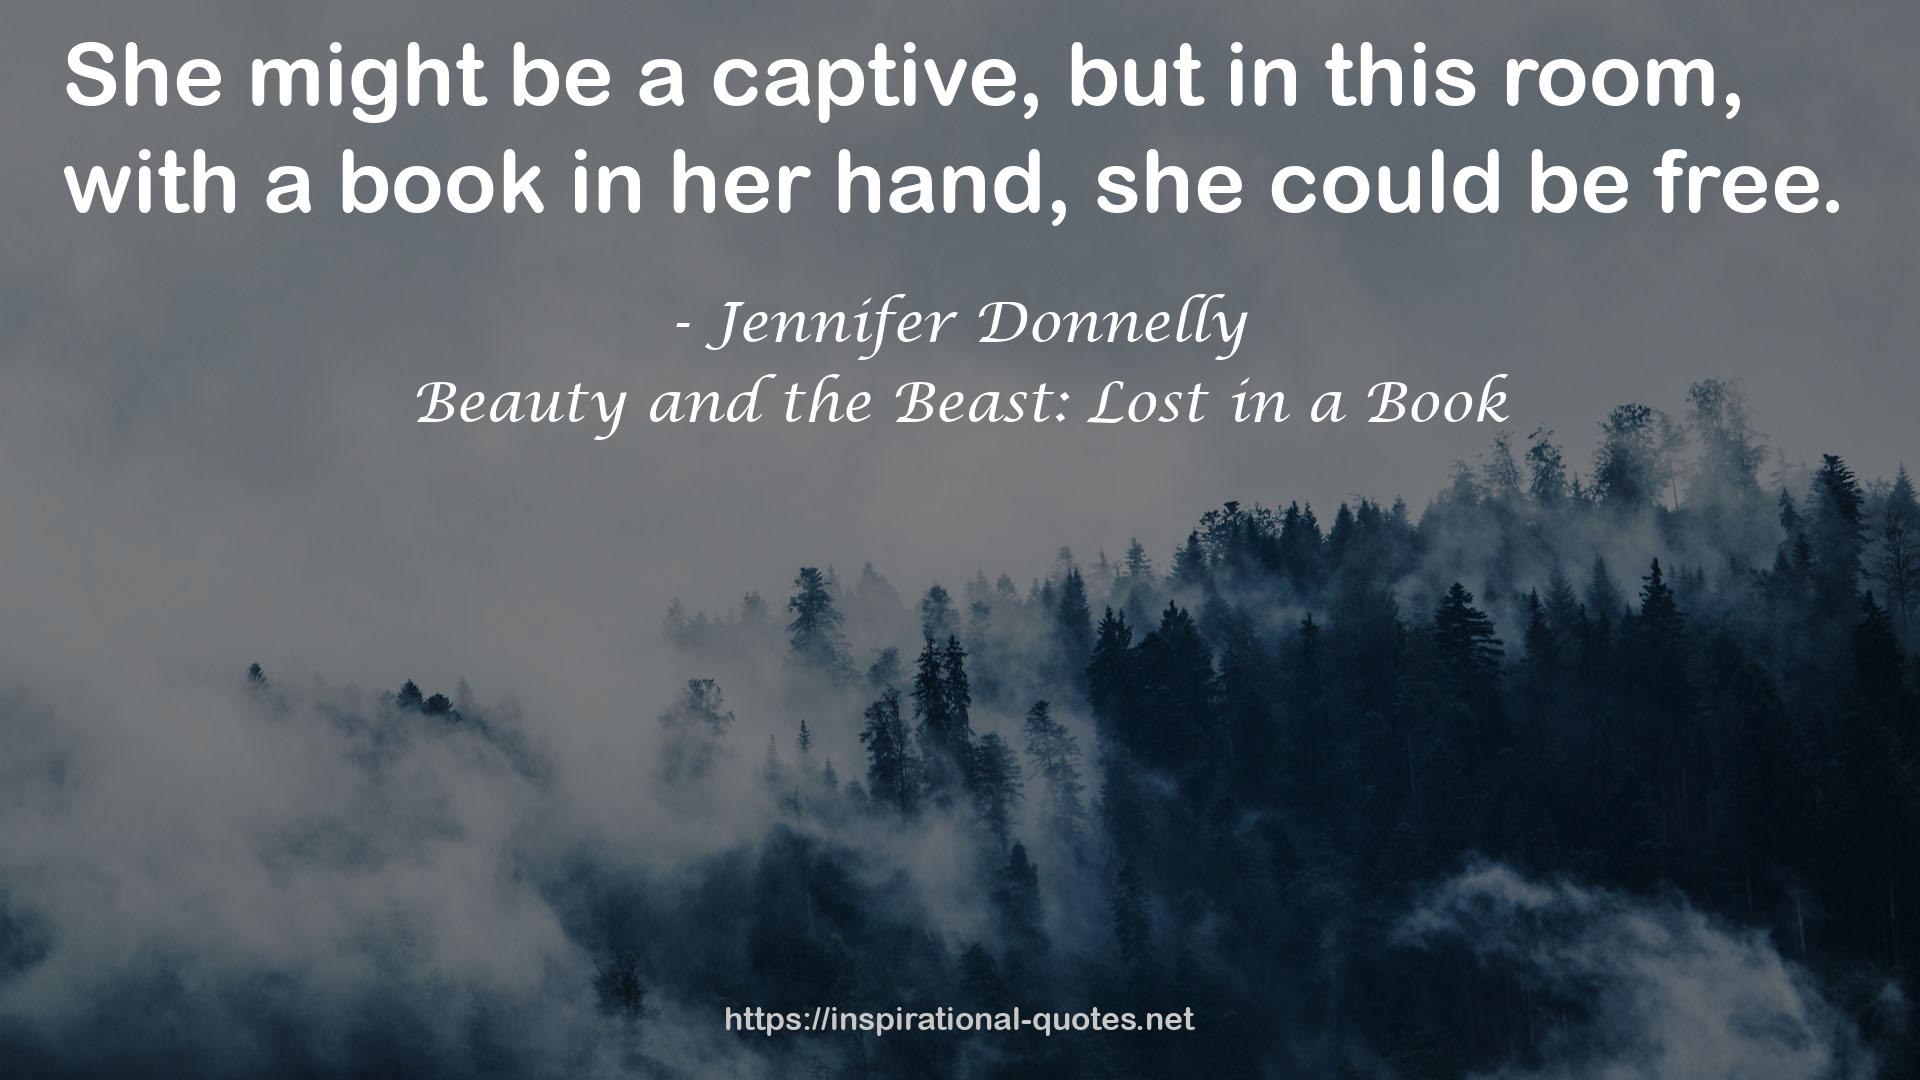 Beauty and the Beast: Lost in a Book QUOTES